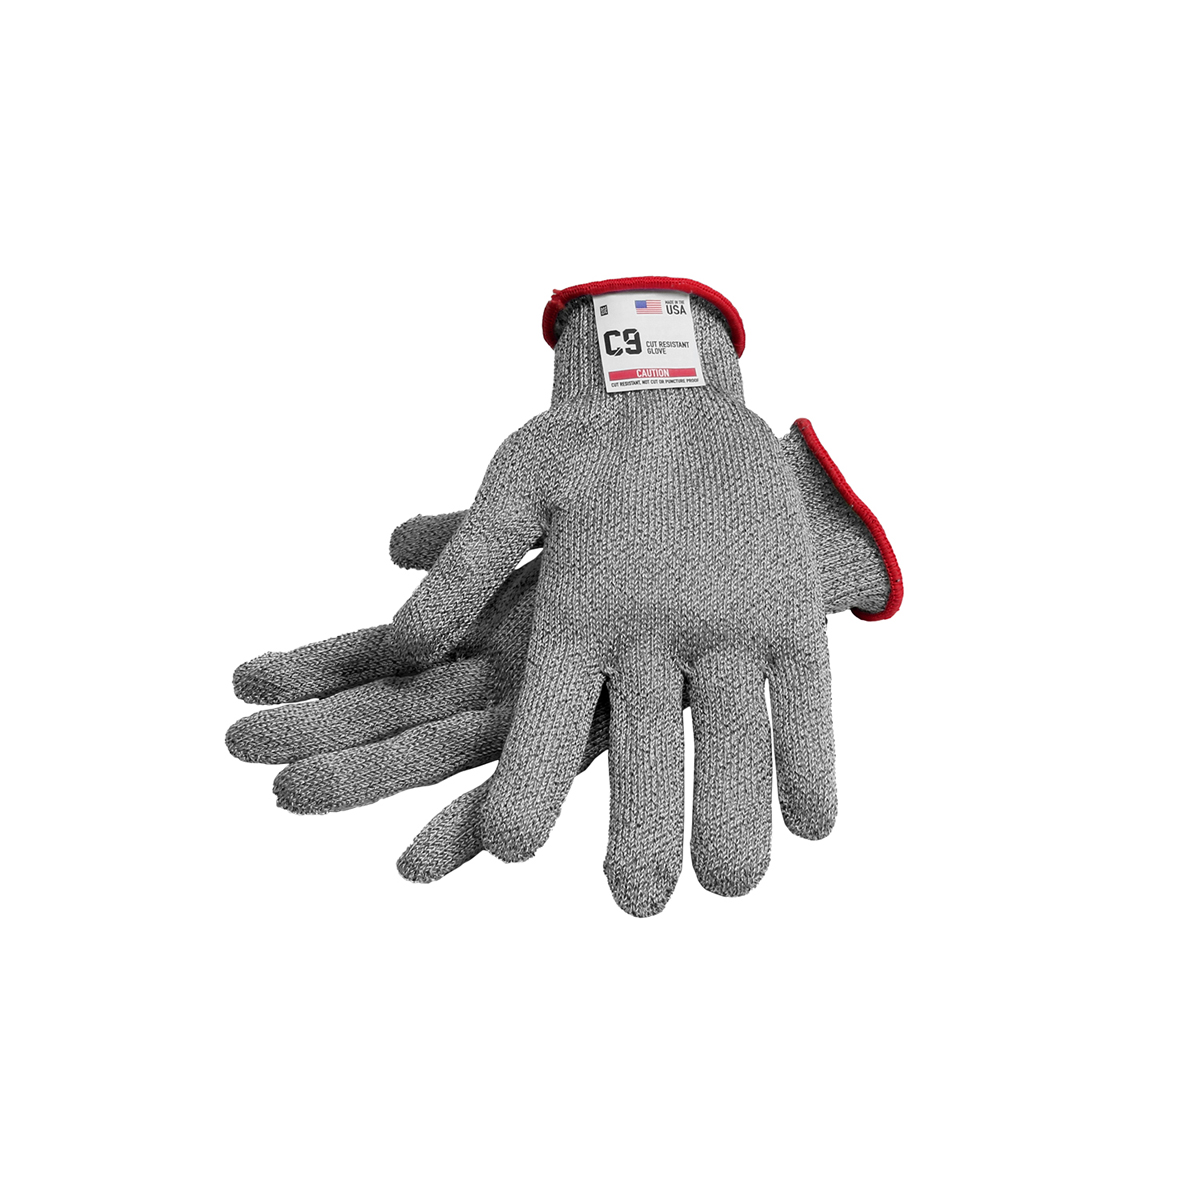 Alfa 3020 Cut Resistant Safety Glove, Red Cuff - X Small